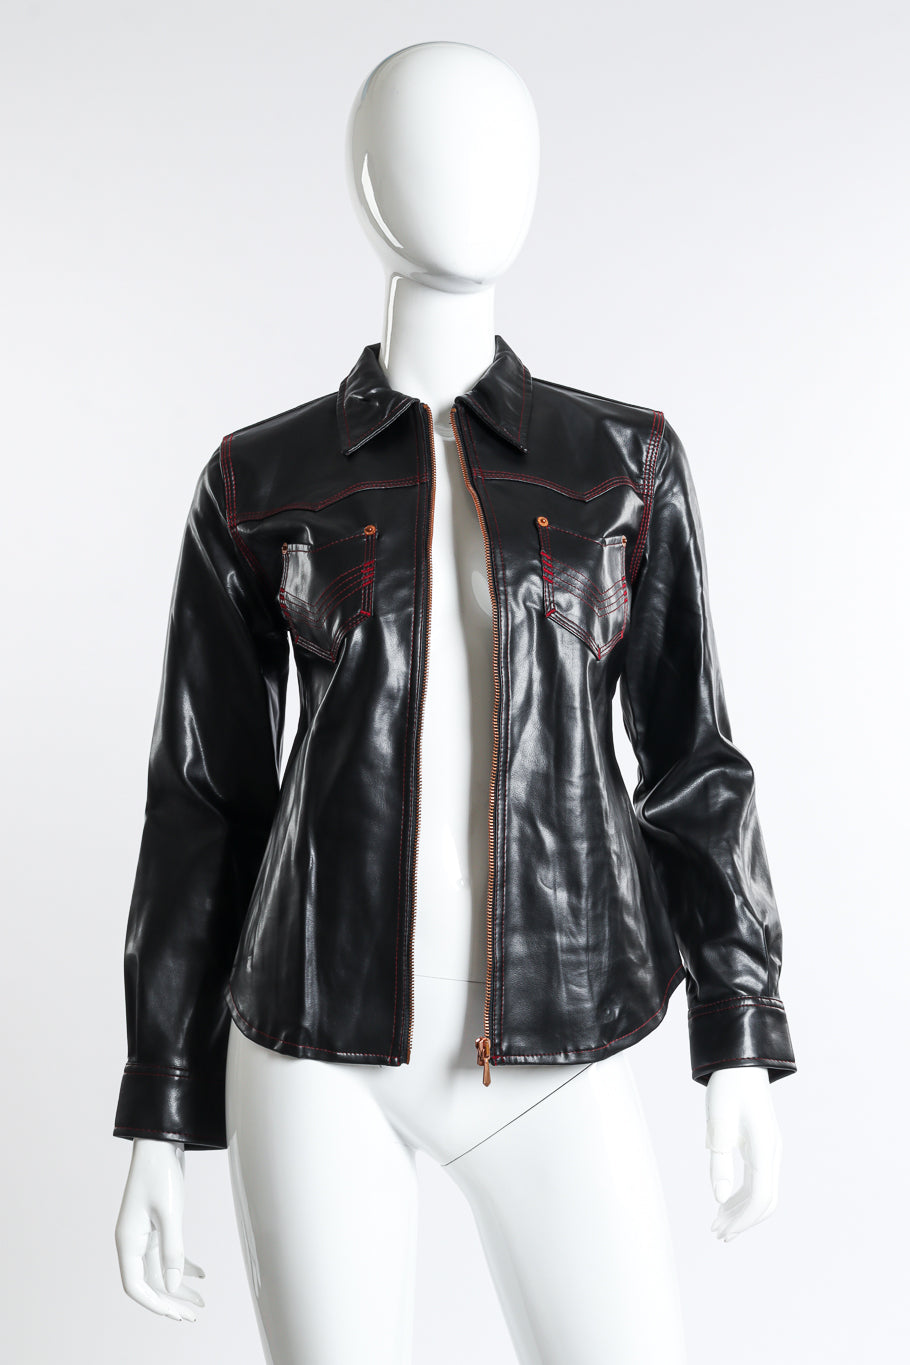 Vintage Jean Paul Gaultier Jeans PVC Western style jacket with maroon stitching as worn open on mannequin @Recess LA